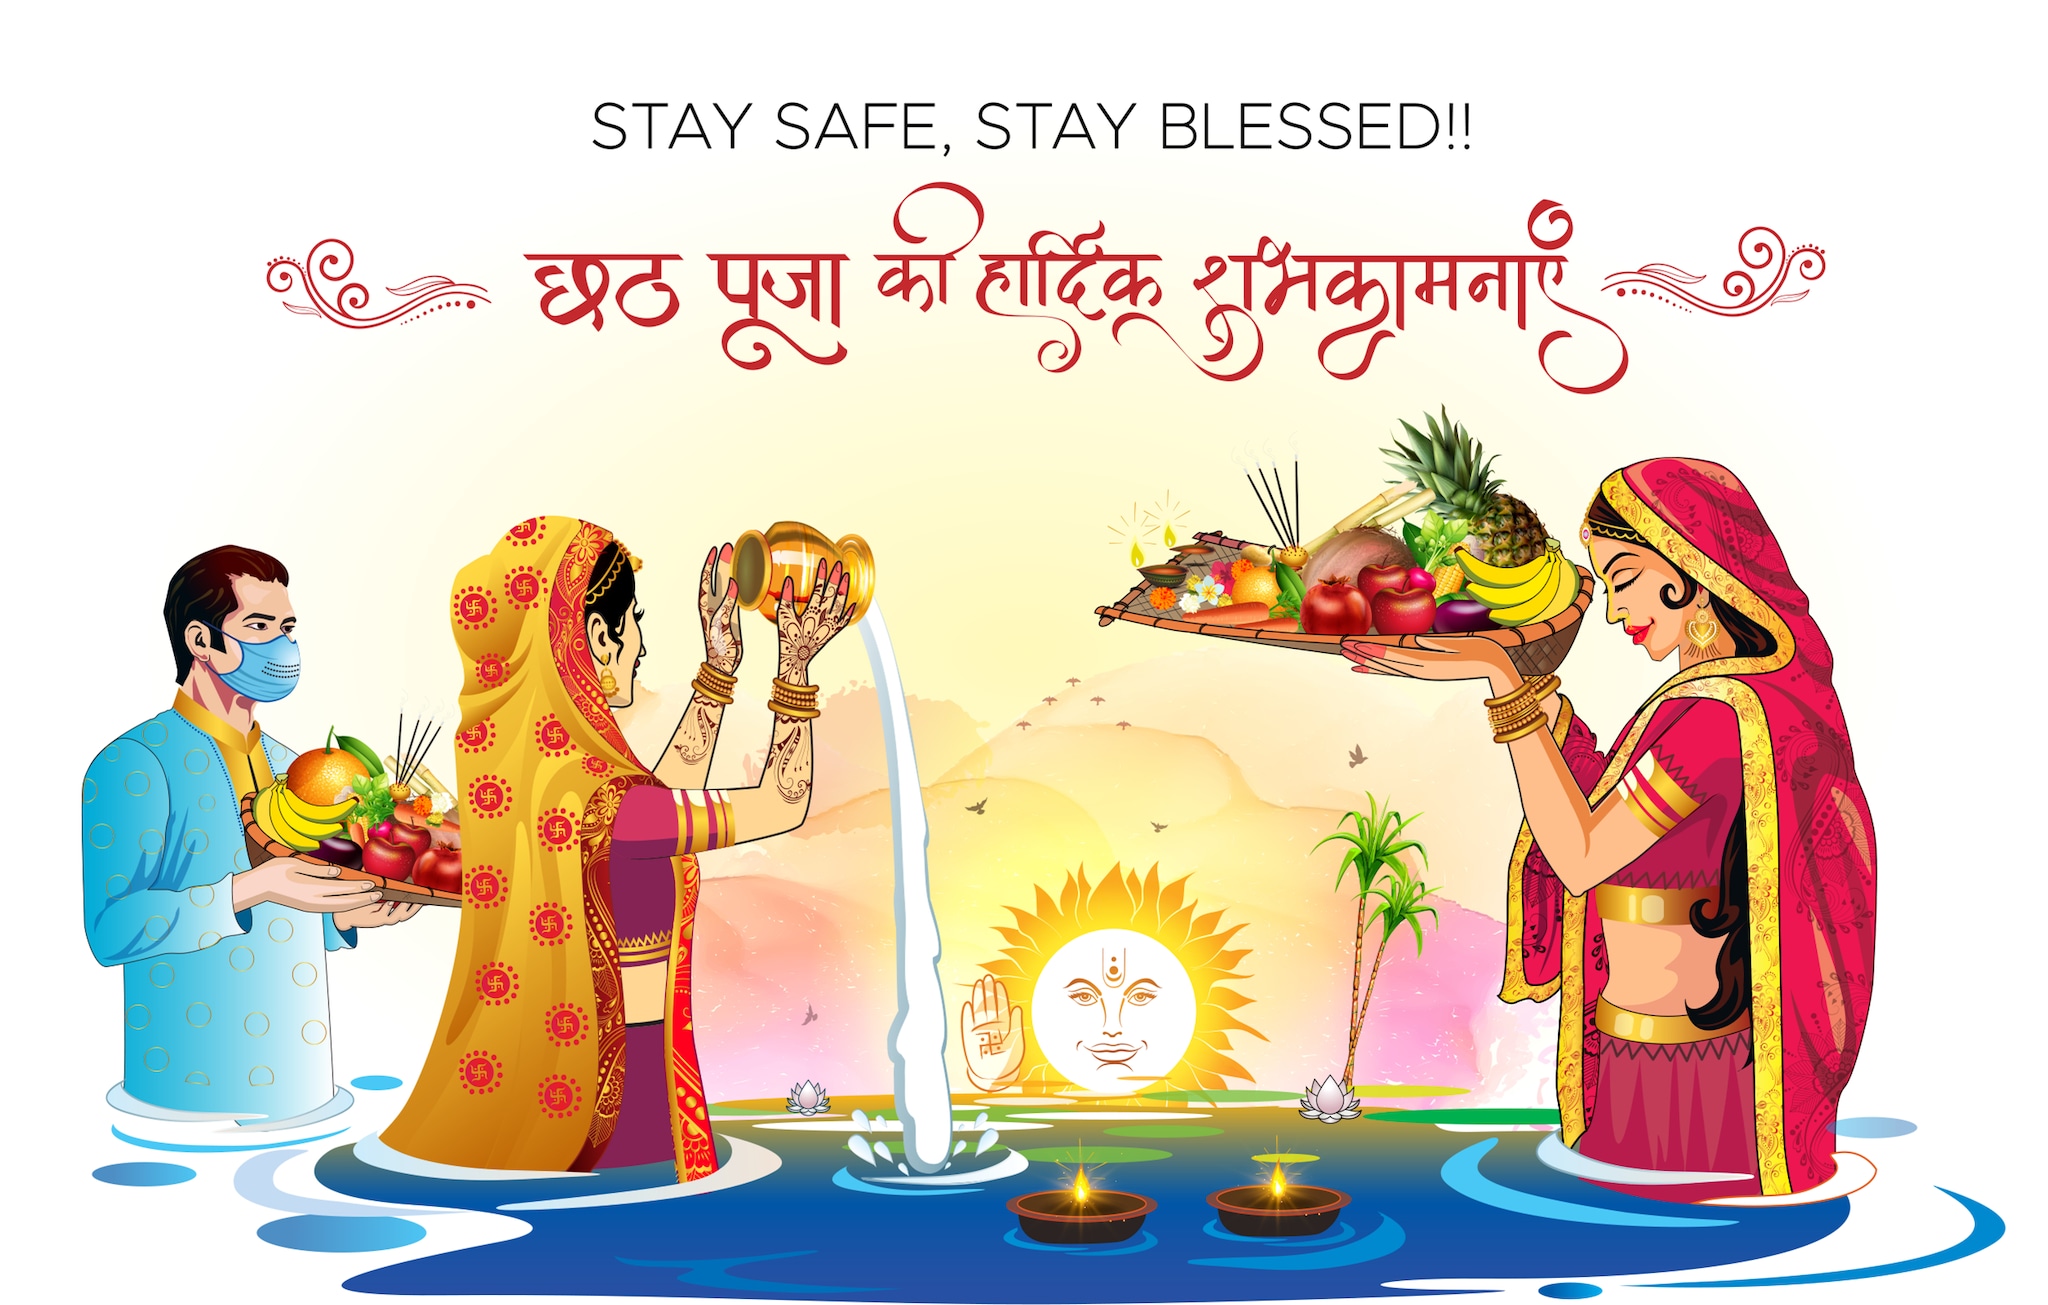 Happy Chhath Puja 2022 Wishes, Greetings, Whatsapp Status, Images And Quotes You Can Share With Your Dear Ones. (Image: Shutterstock)   